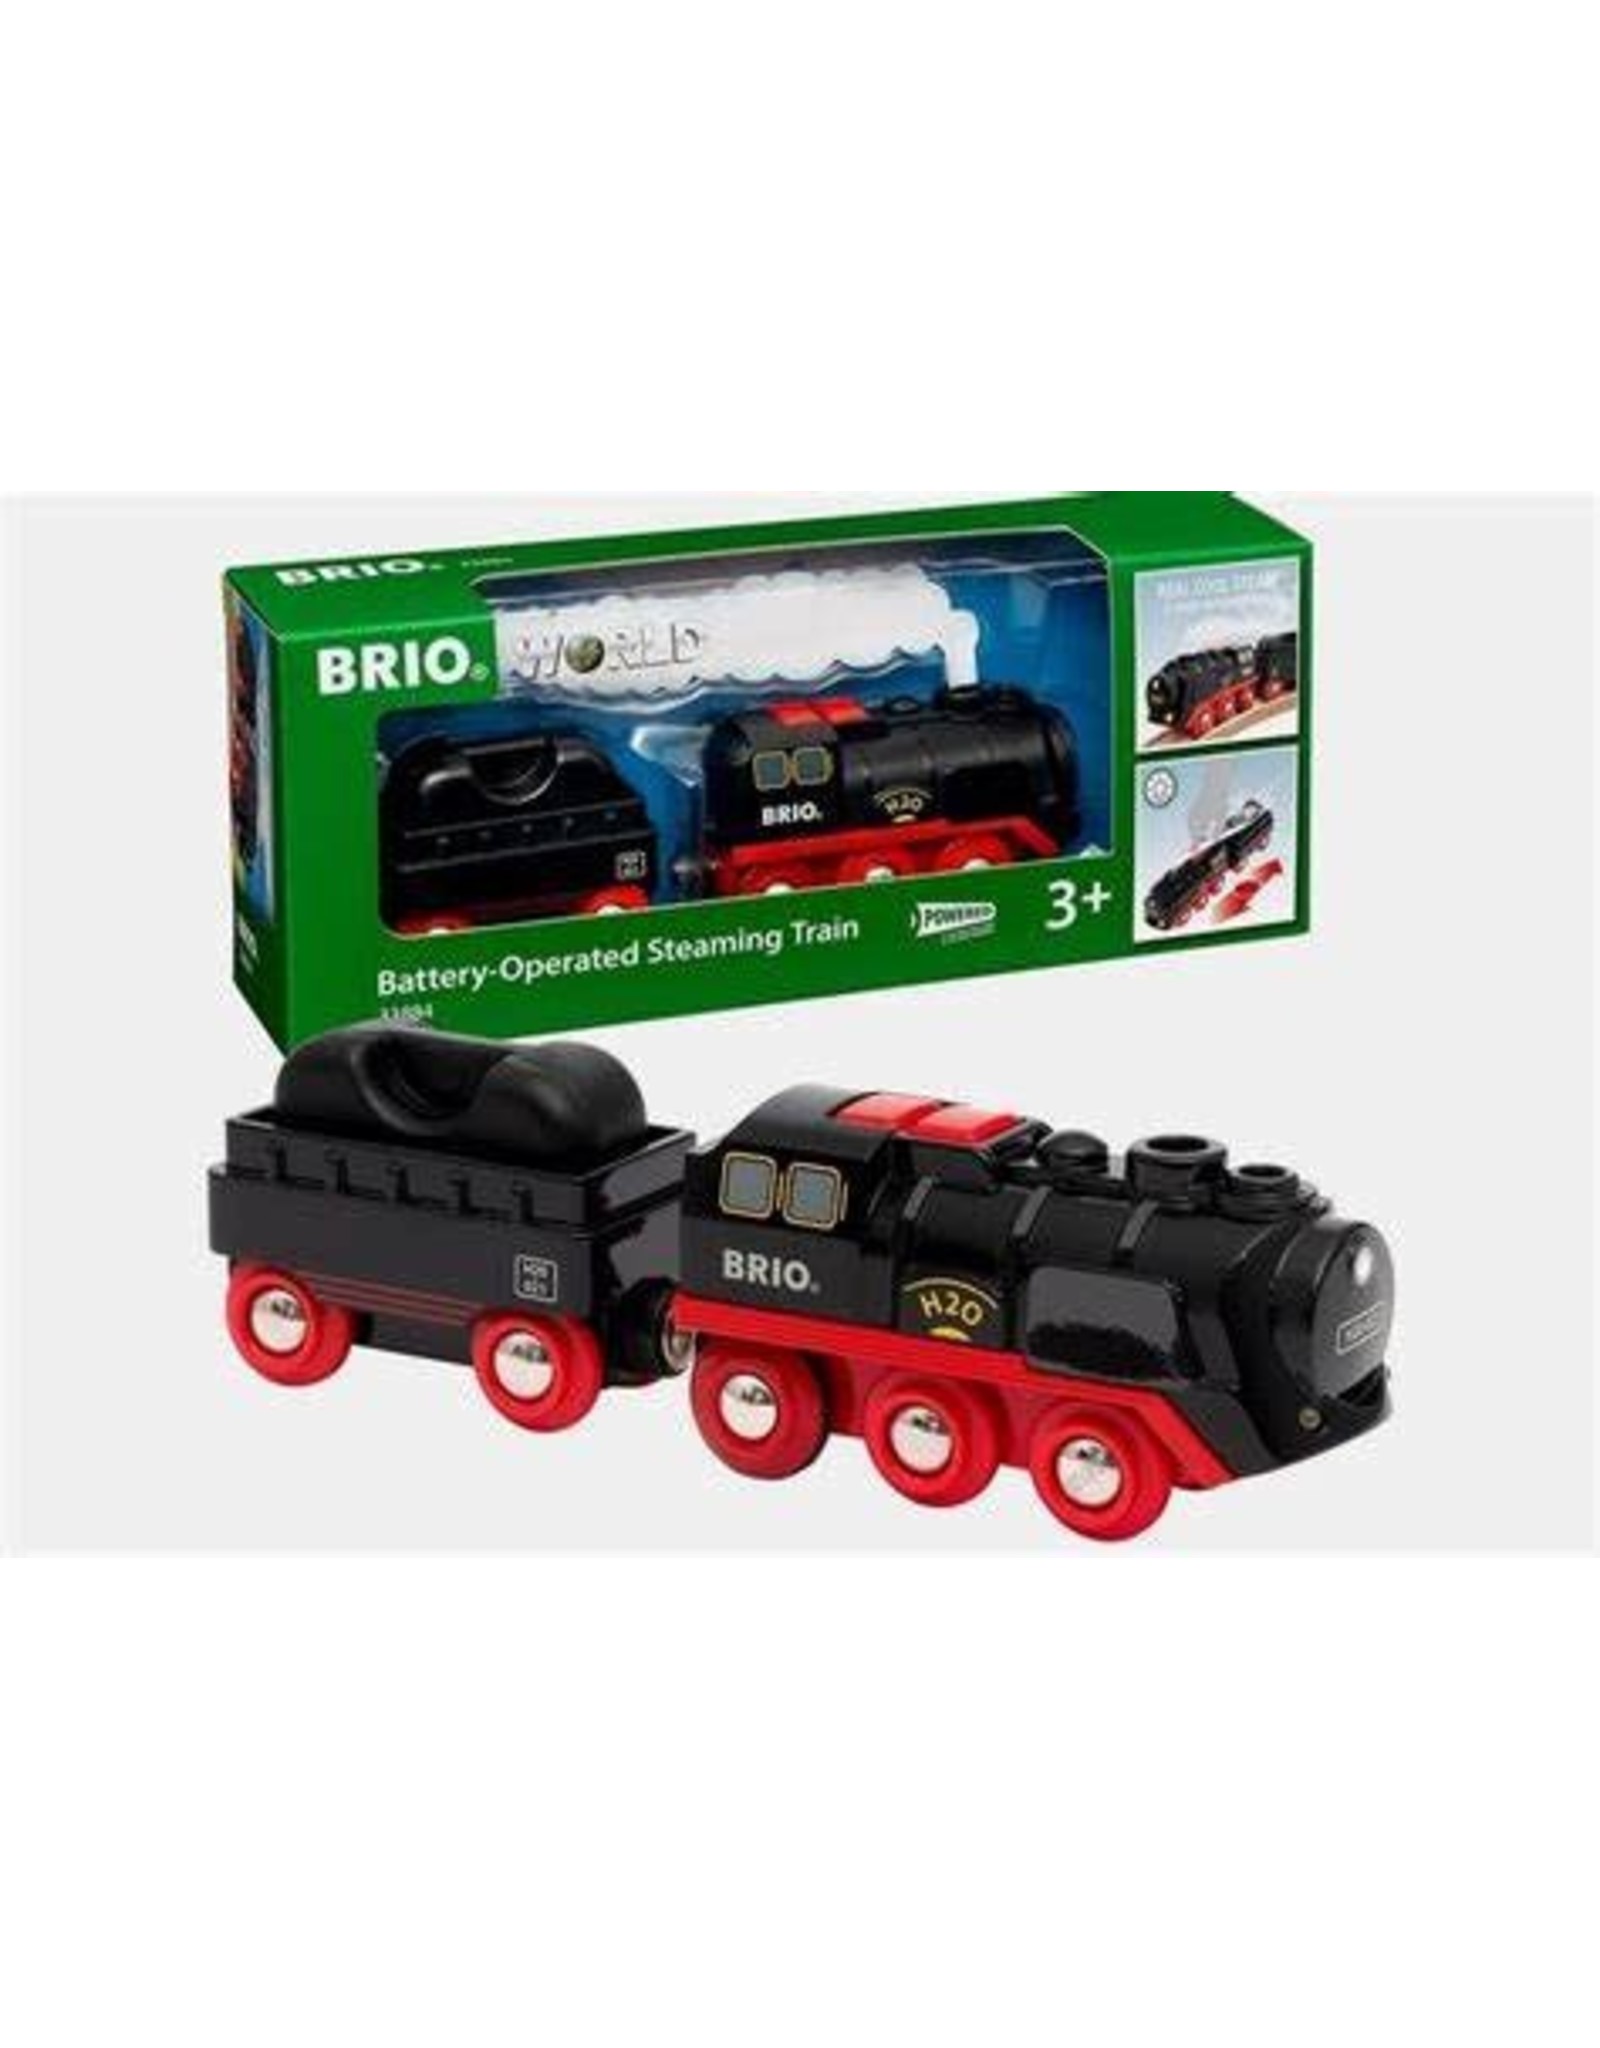 Battery Operated Steam Train